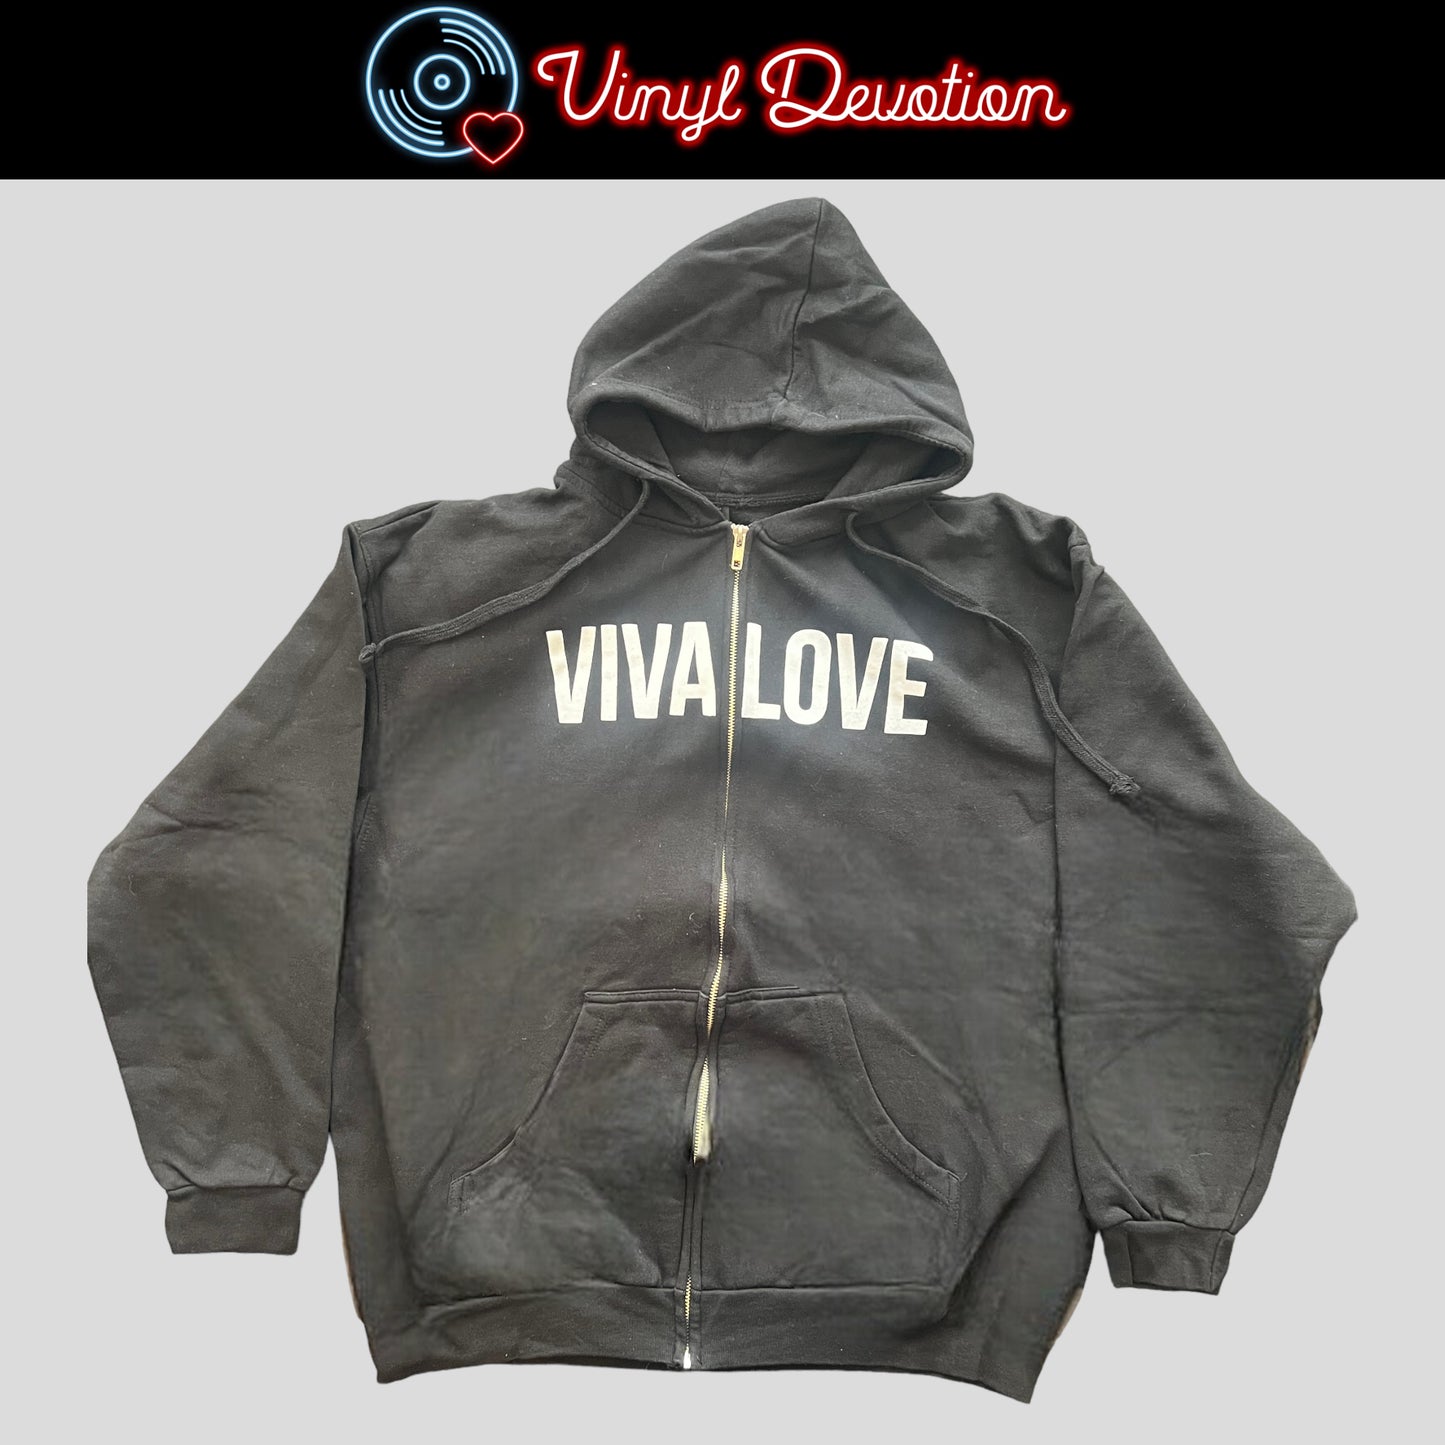 American Nightmare Band Viva Love Zip Up Hoodie Size XL Give Up The Ghost